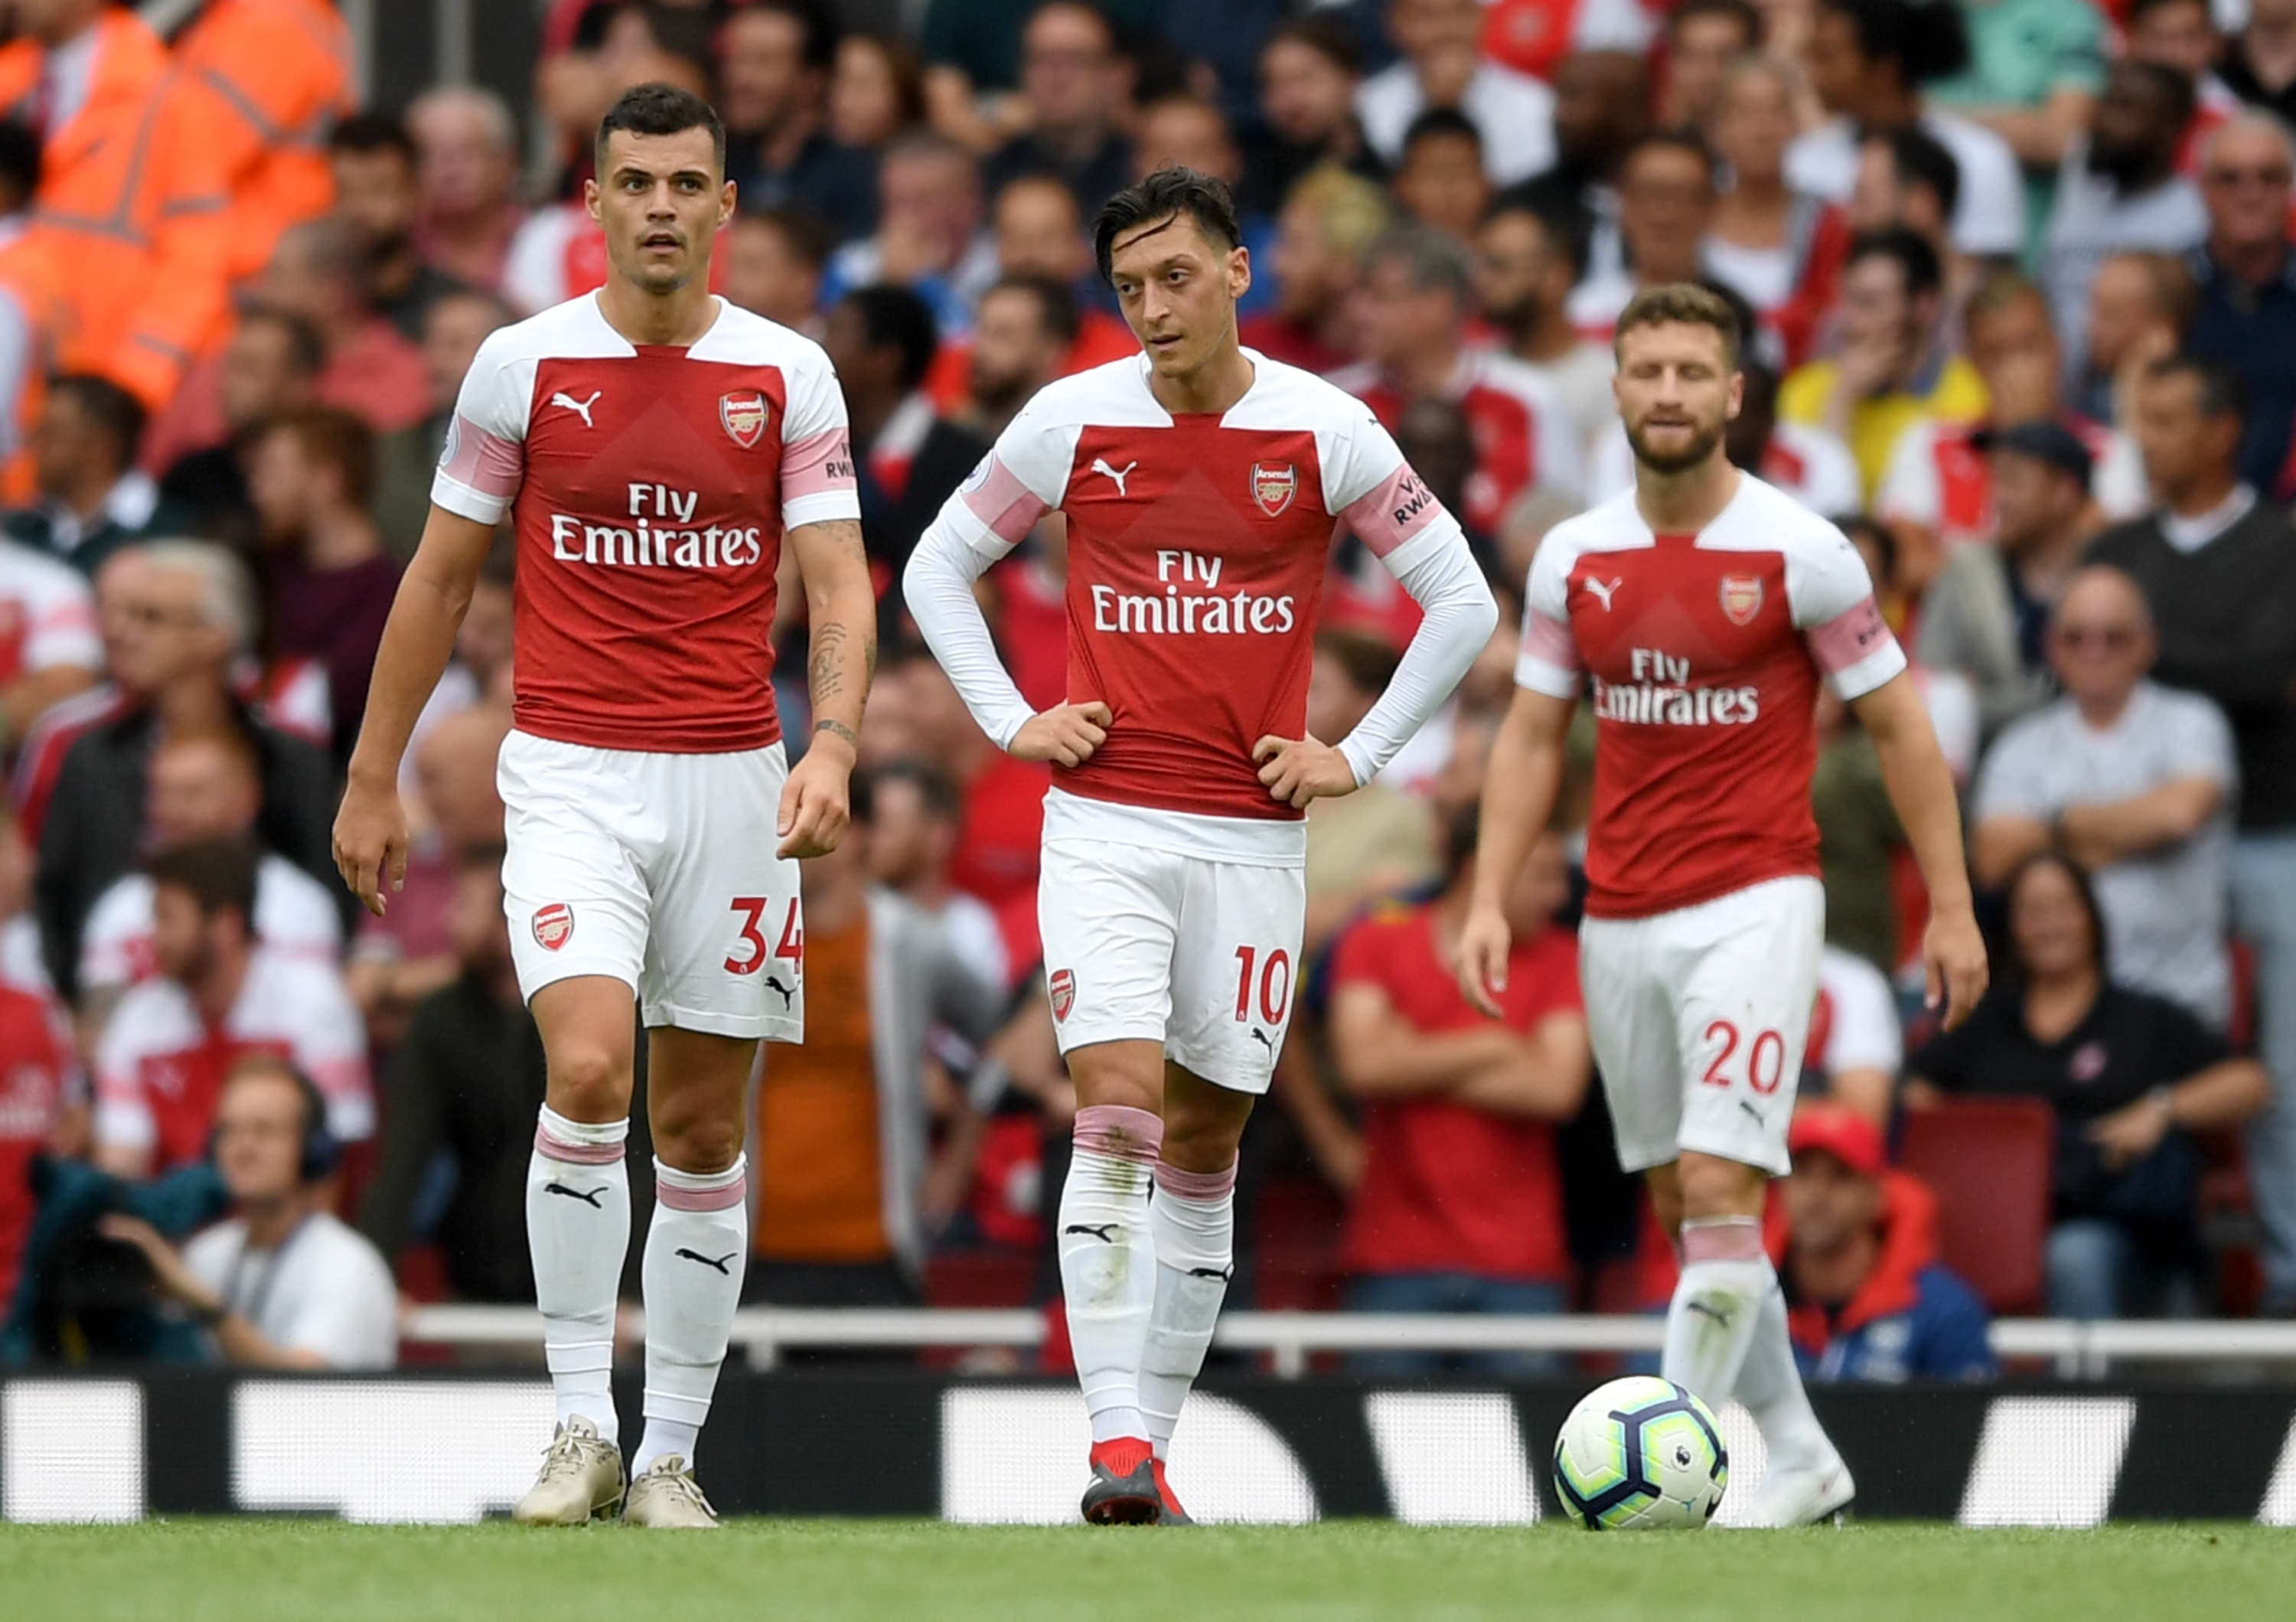 LONDON, ENGLAND - AUGUST 12:  Granit Xhaka of Arsenal and Mesut Ozil of Arsenal look dejected after conceding a second goal during the Premier League match between Arsenal FC and Manchester City at Emirates Stadium on August 12, 2018 in London, United Kingdom.  (Photo by Shaun Botterill/Getty Images)